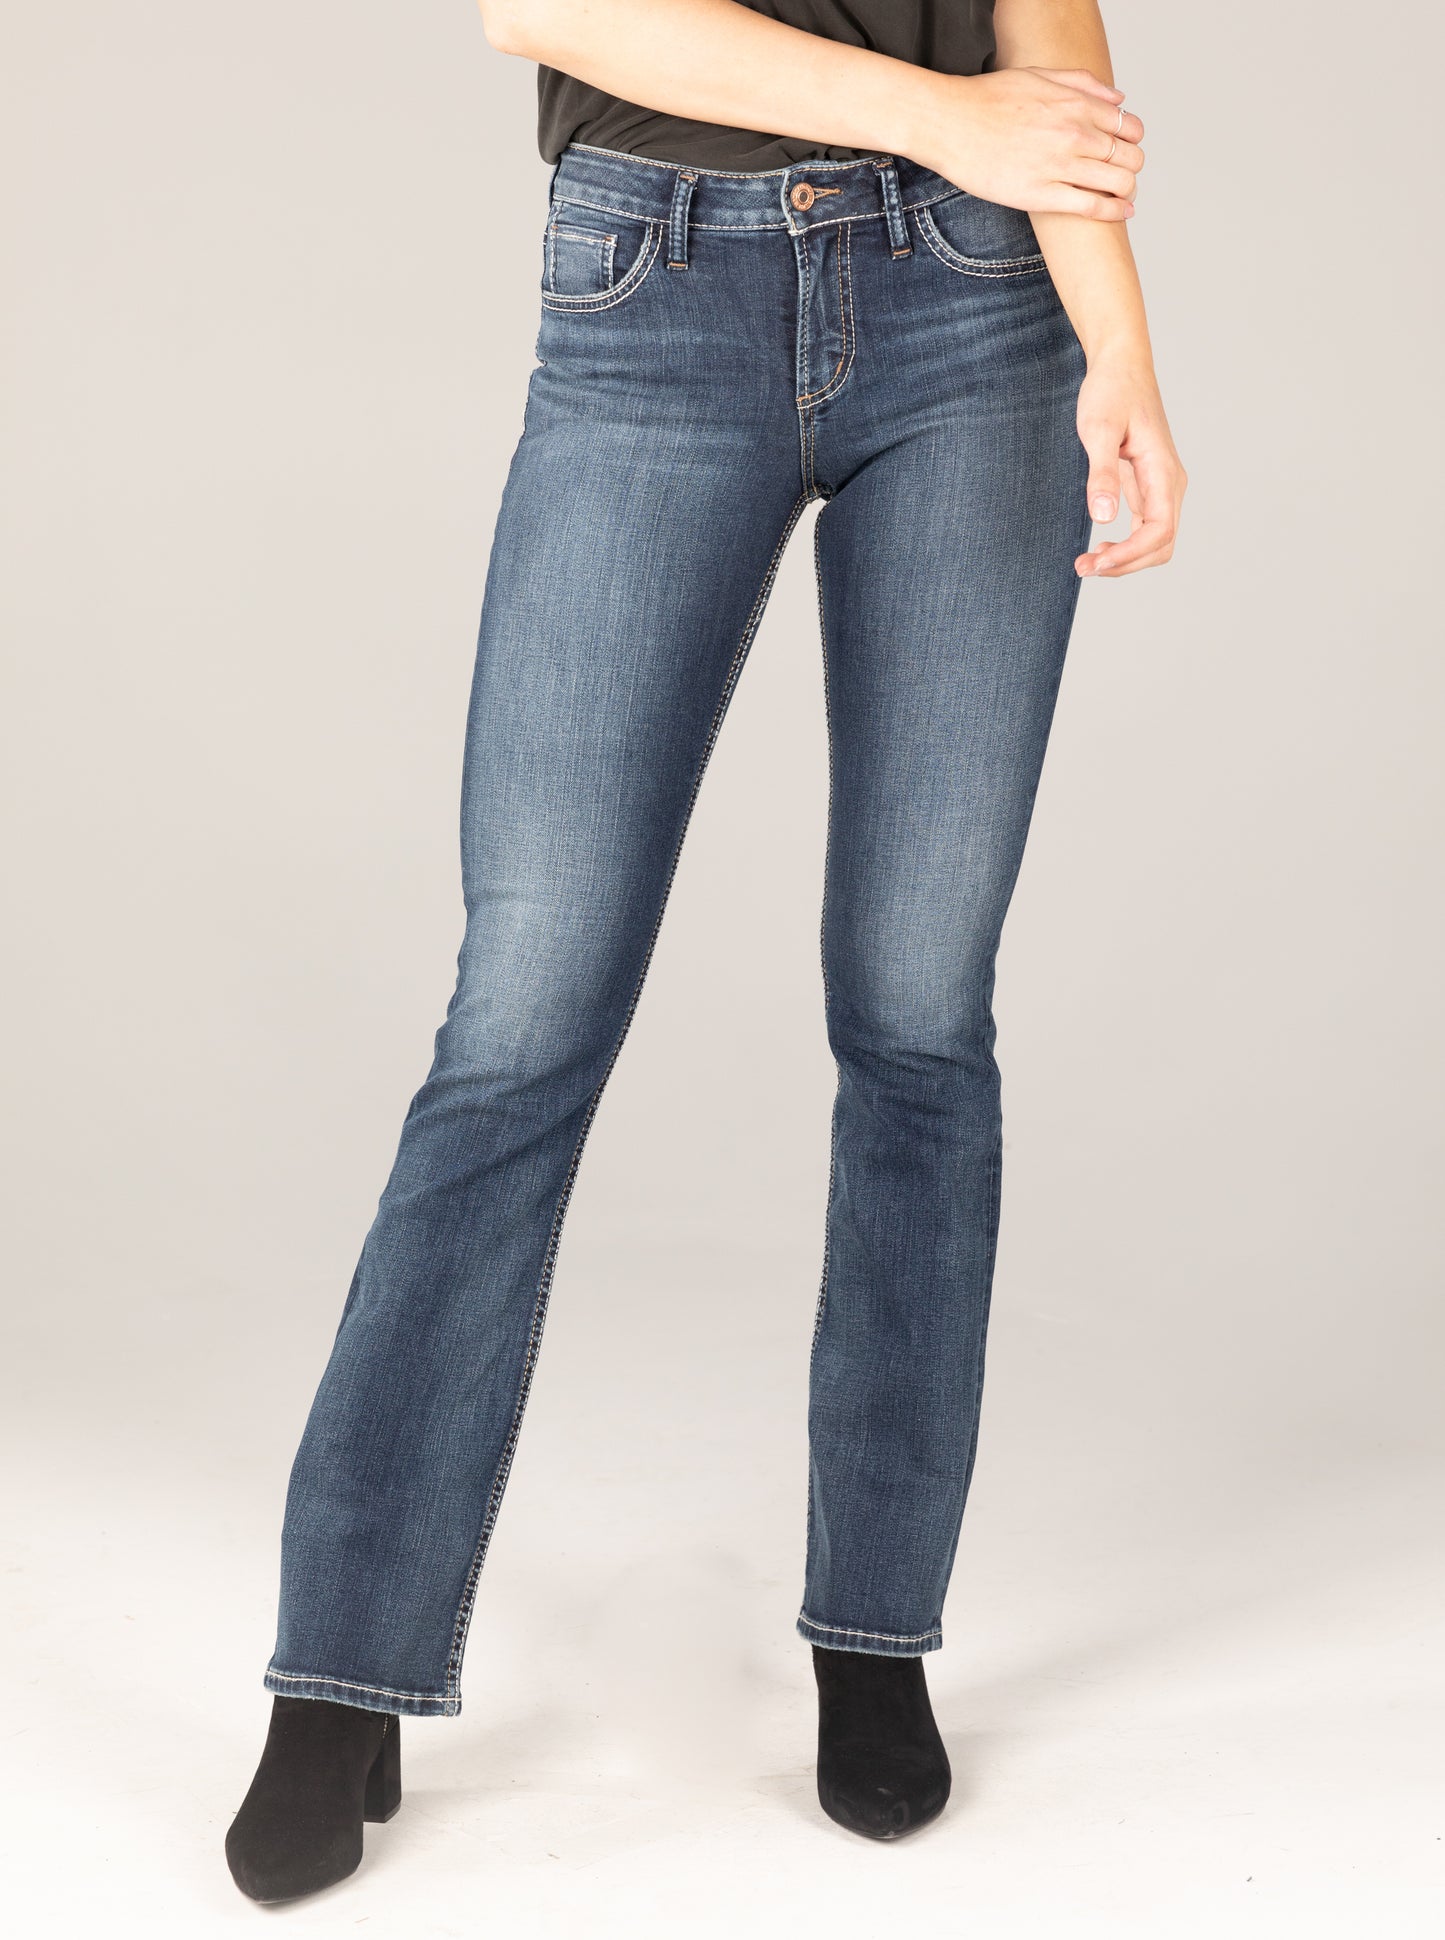 Silver Jeans Avery High Rise Slim Bootcut Jeans